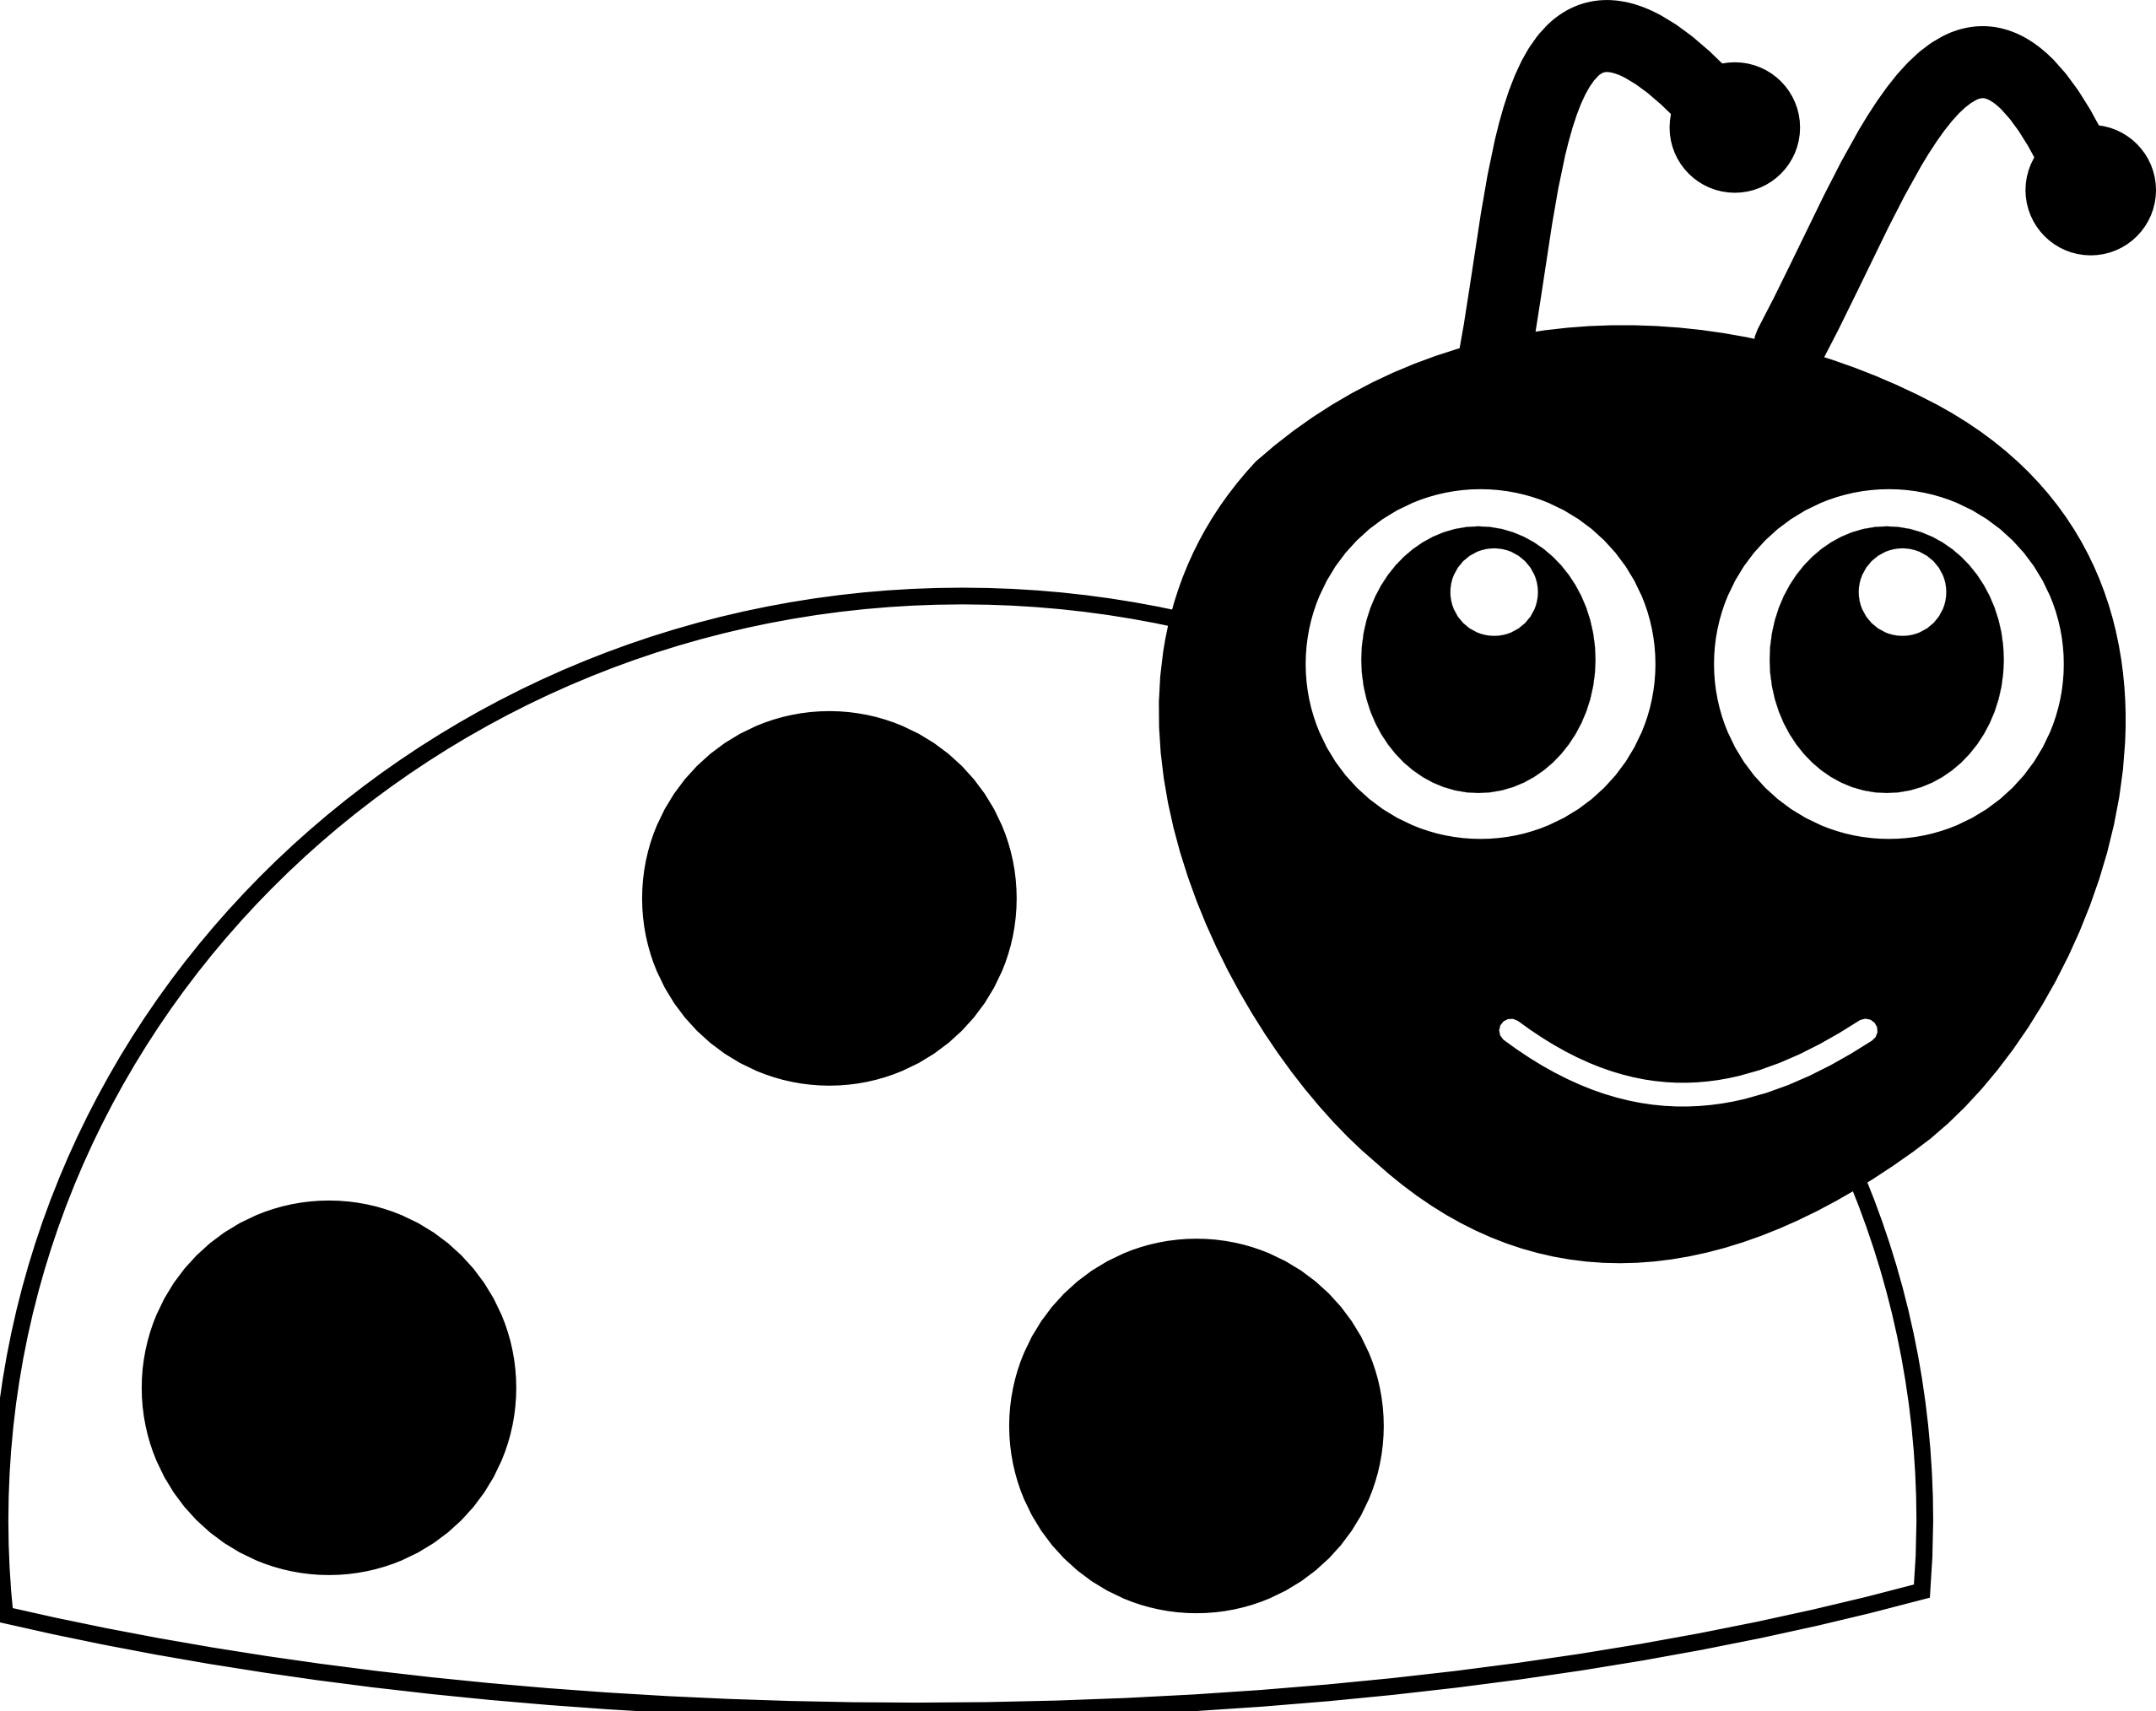 Beetle black and white. Mcdonalds clipart outline